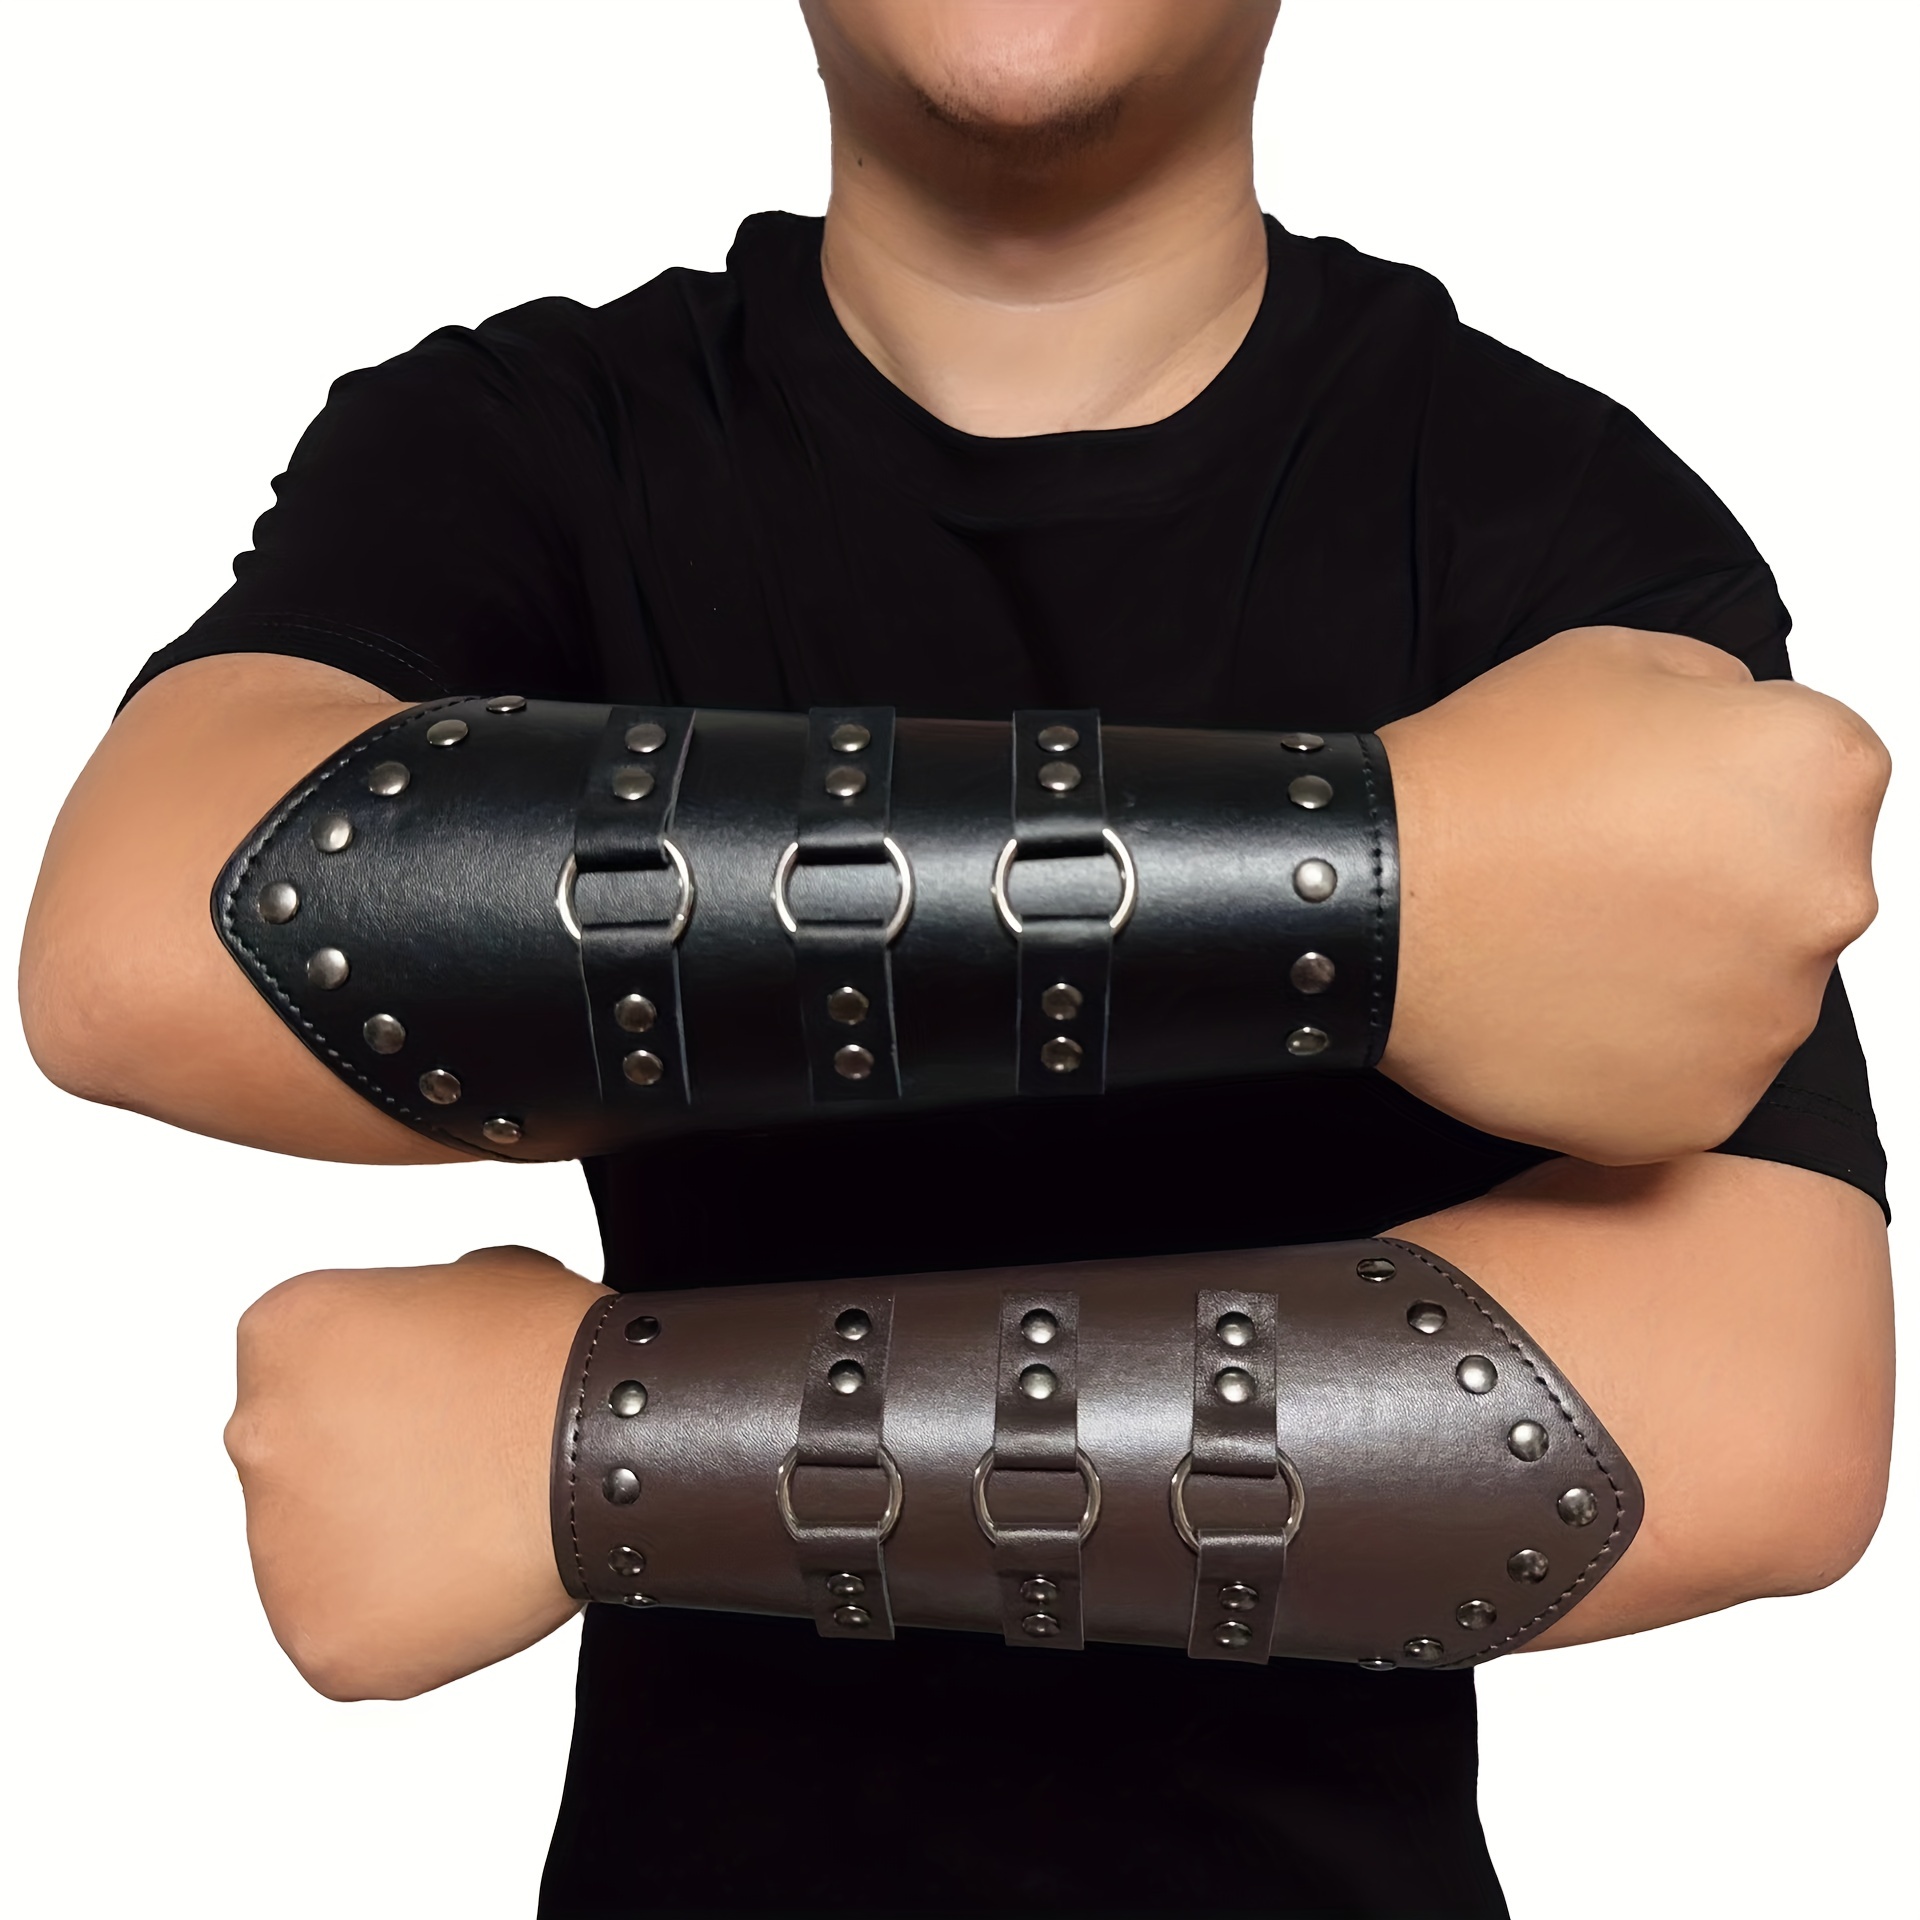  Leather Gauntlet Wristband Medieval Bracers